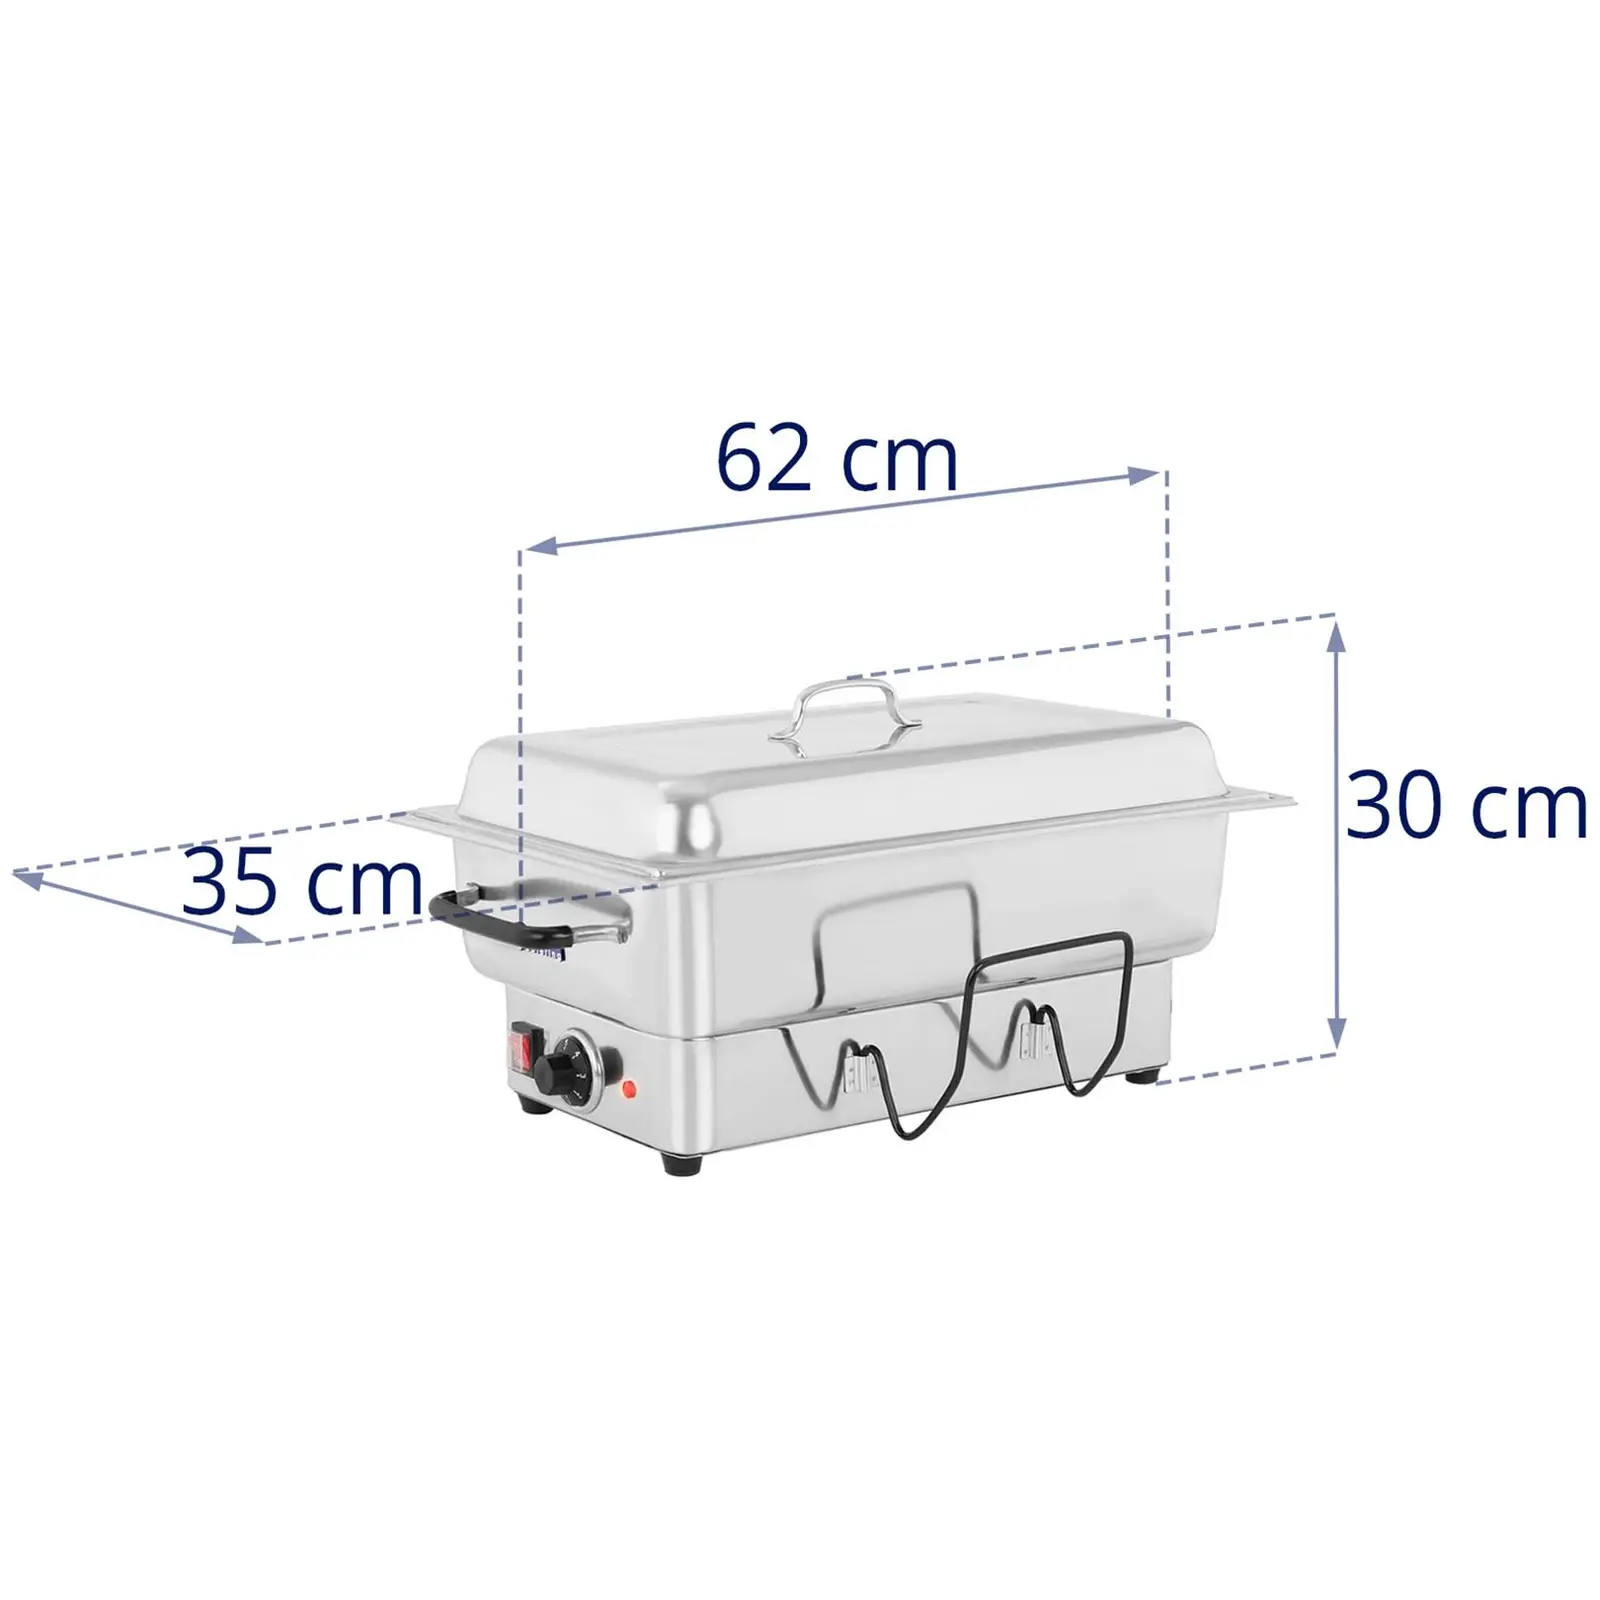 Chafing Dish - 1600 W - GN 1/1 container - 100 mm